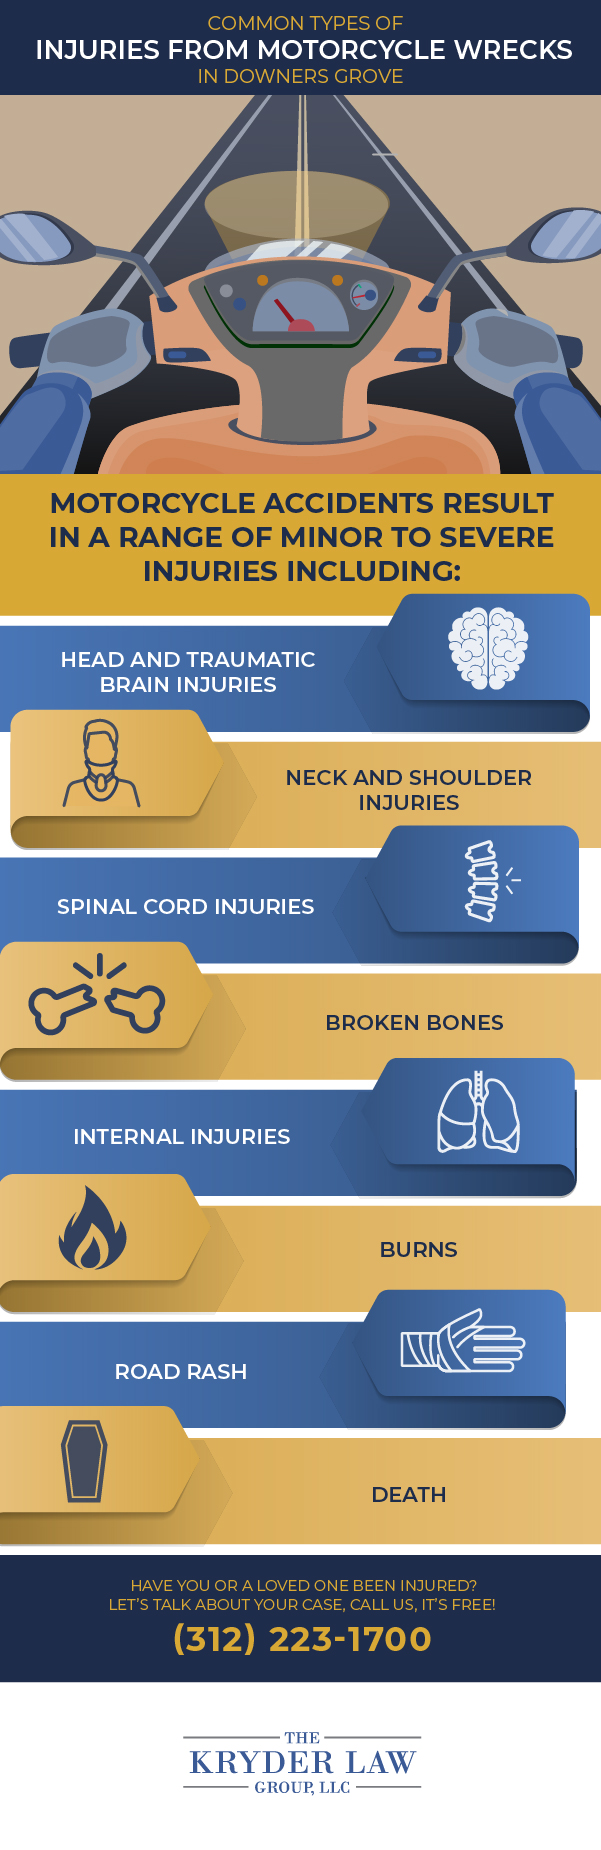 Common Types of Injuries From Motorcycle Wrecks in Downers Grove